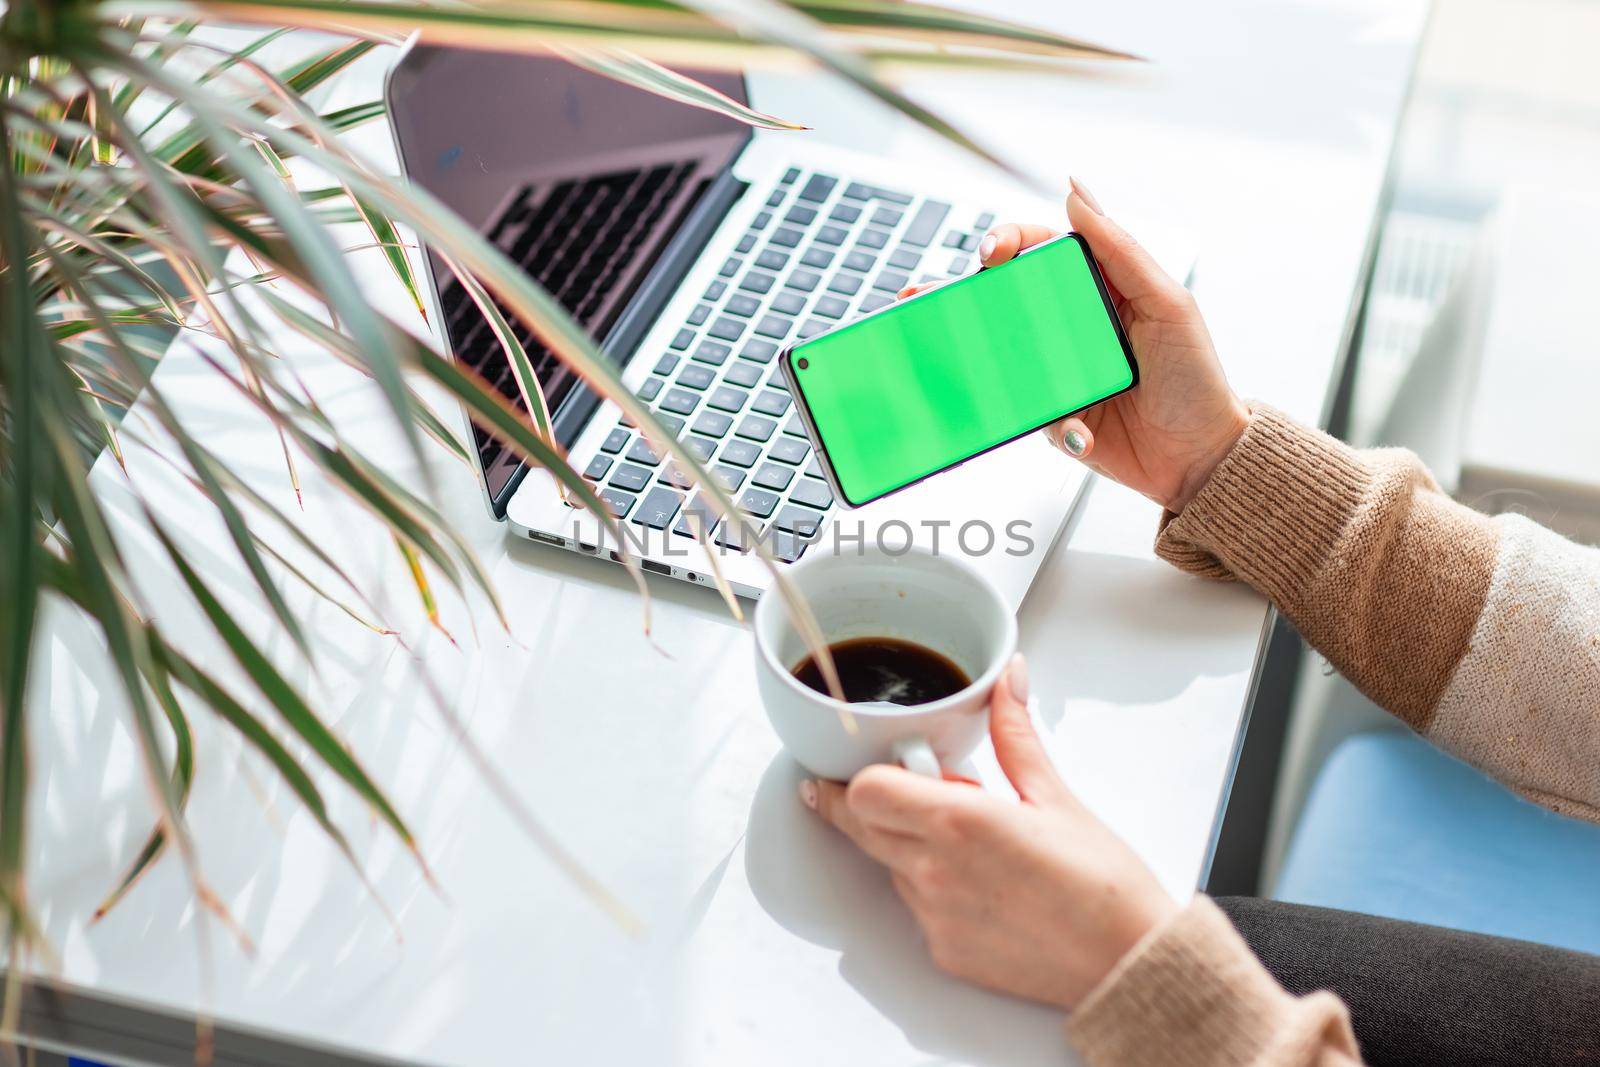 Young woman working,scrolling and checking her phone. Focus on the mobile phonechromakey, green screen on screen.